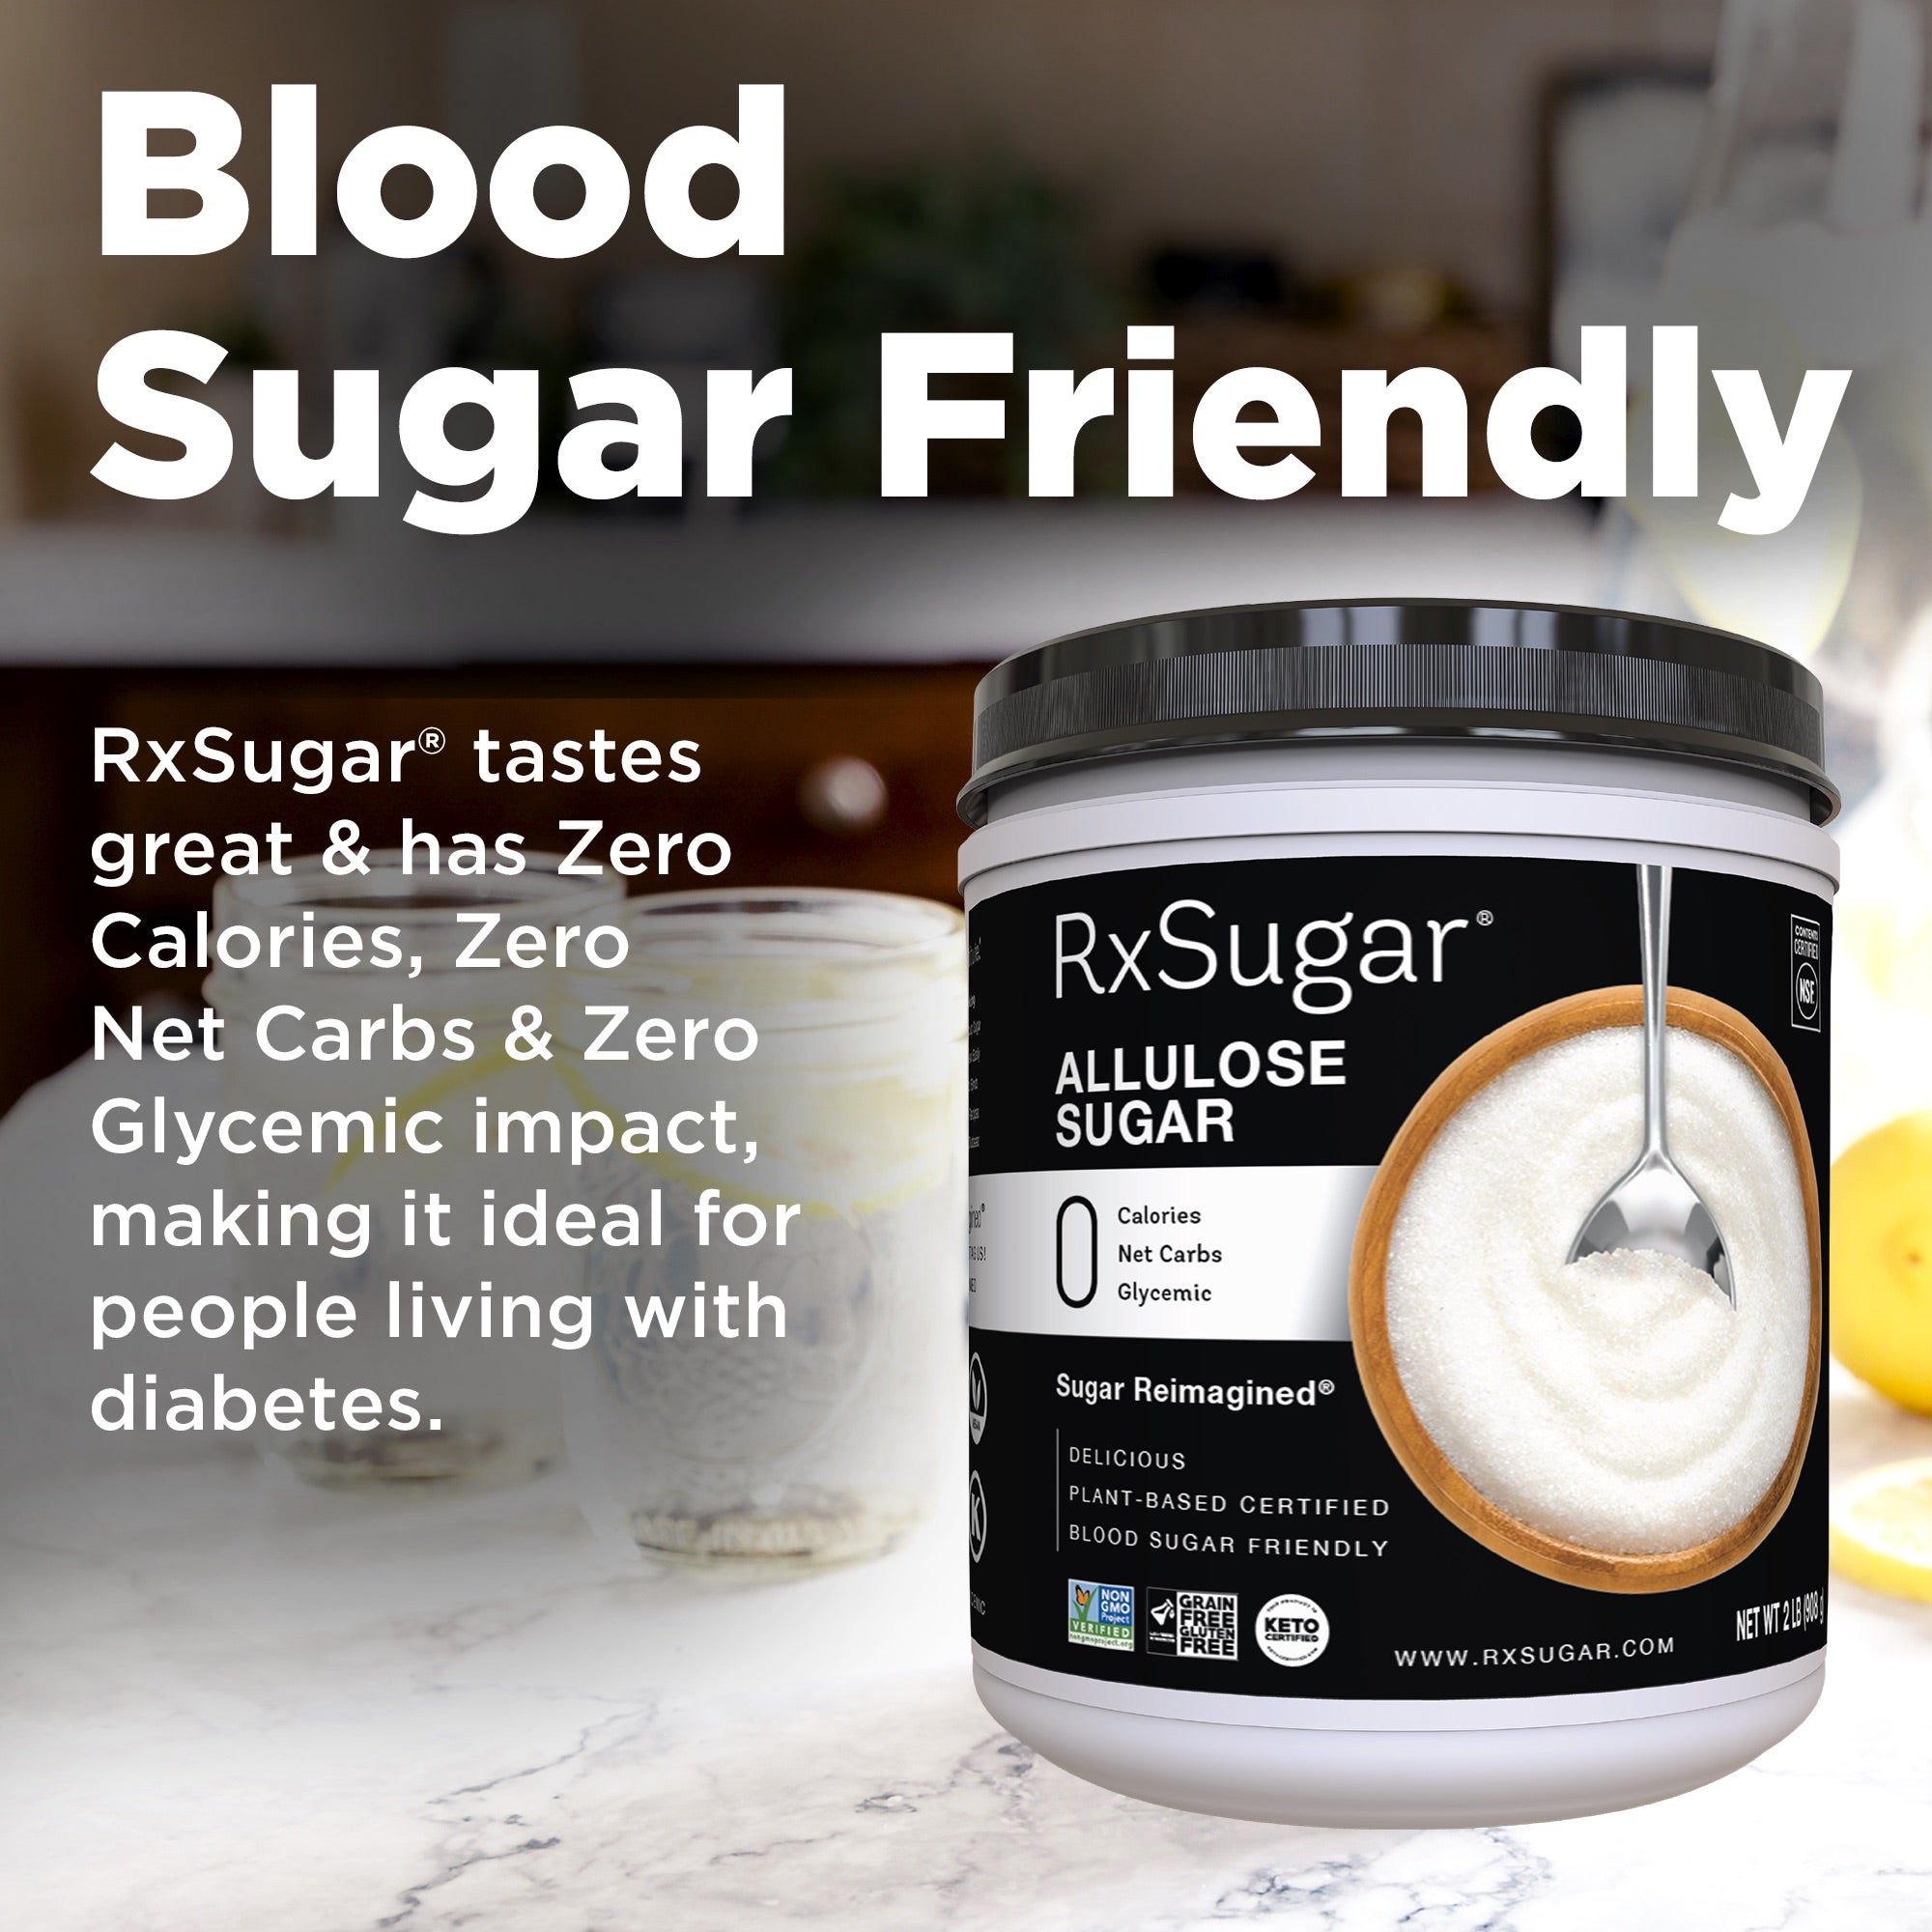 RxSugar tastes great and has zero calories, zero net carbs and zero glycemic index. Perfect for people living with diabetes